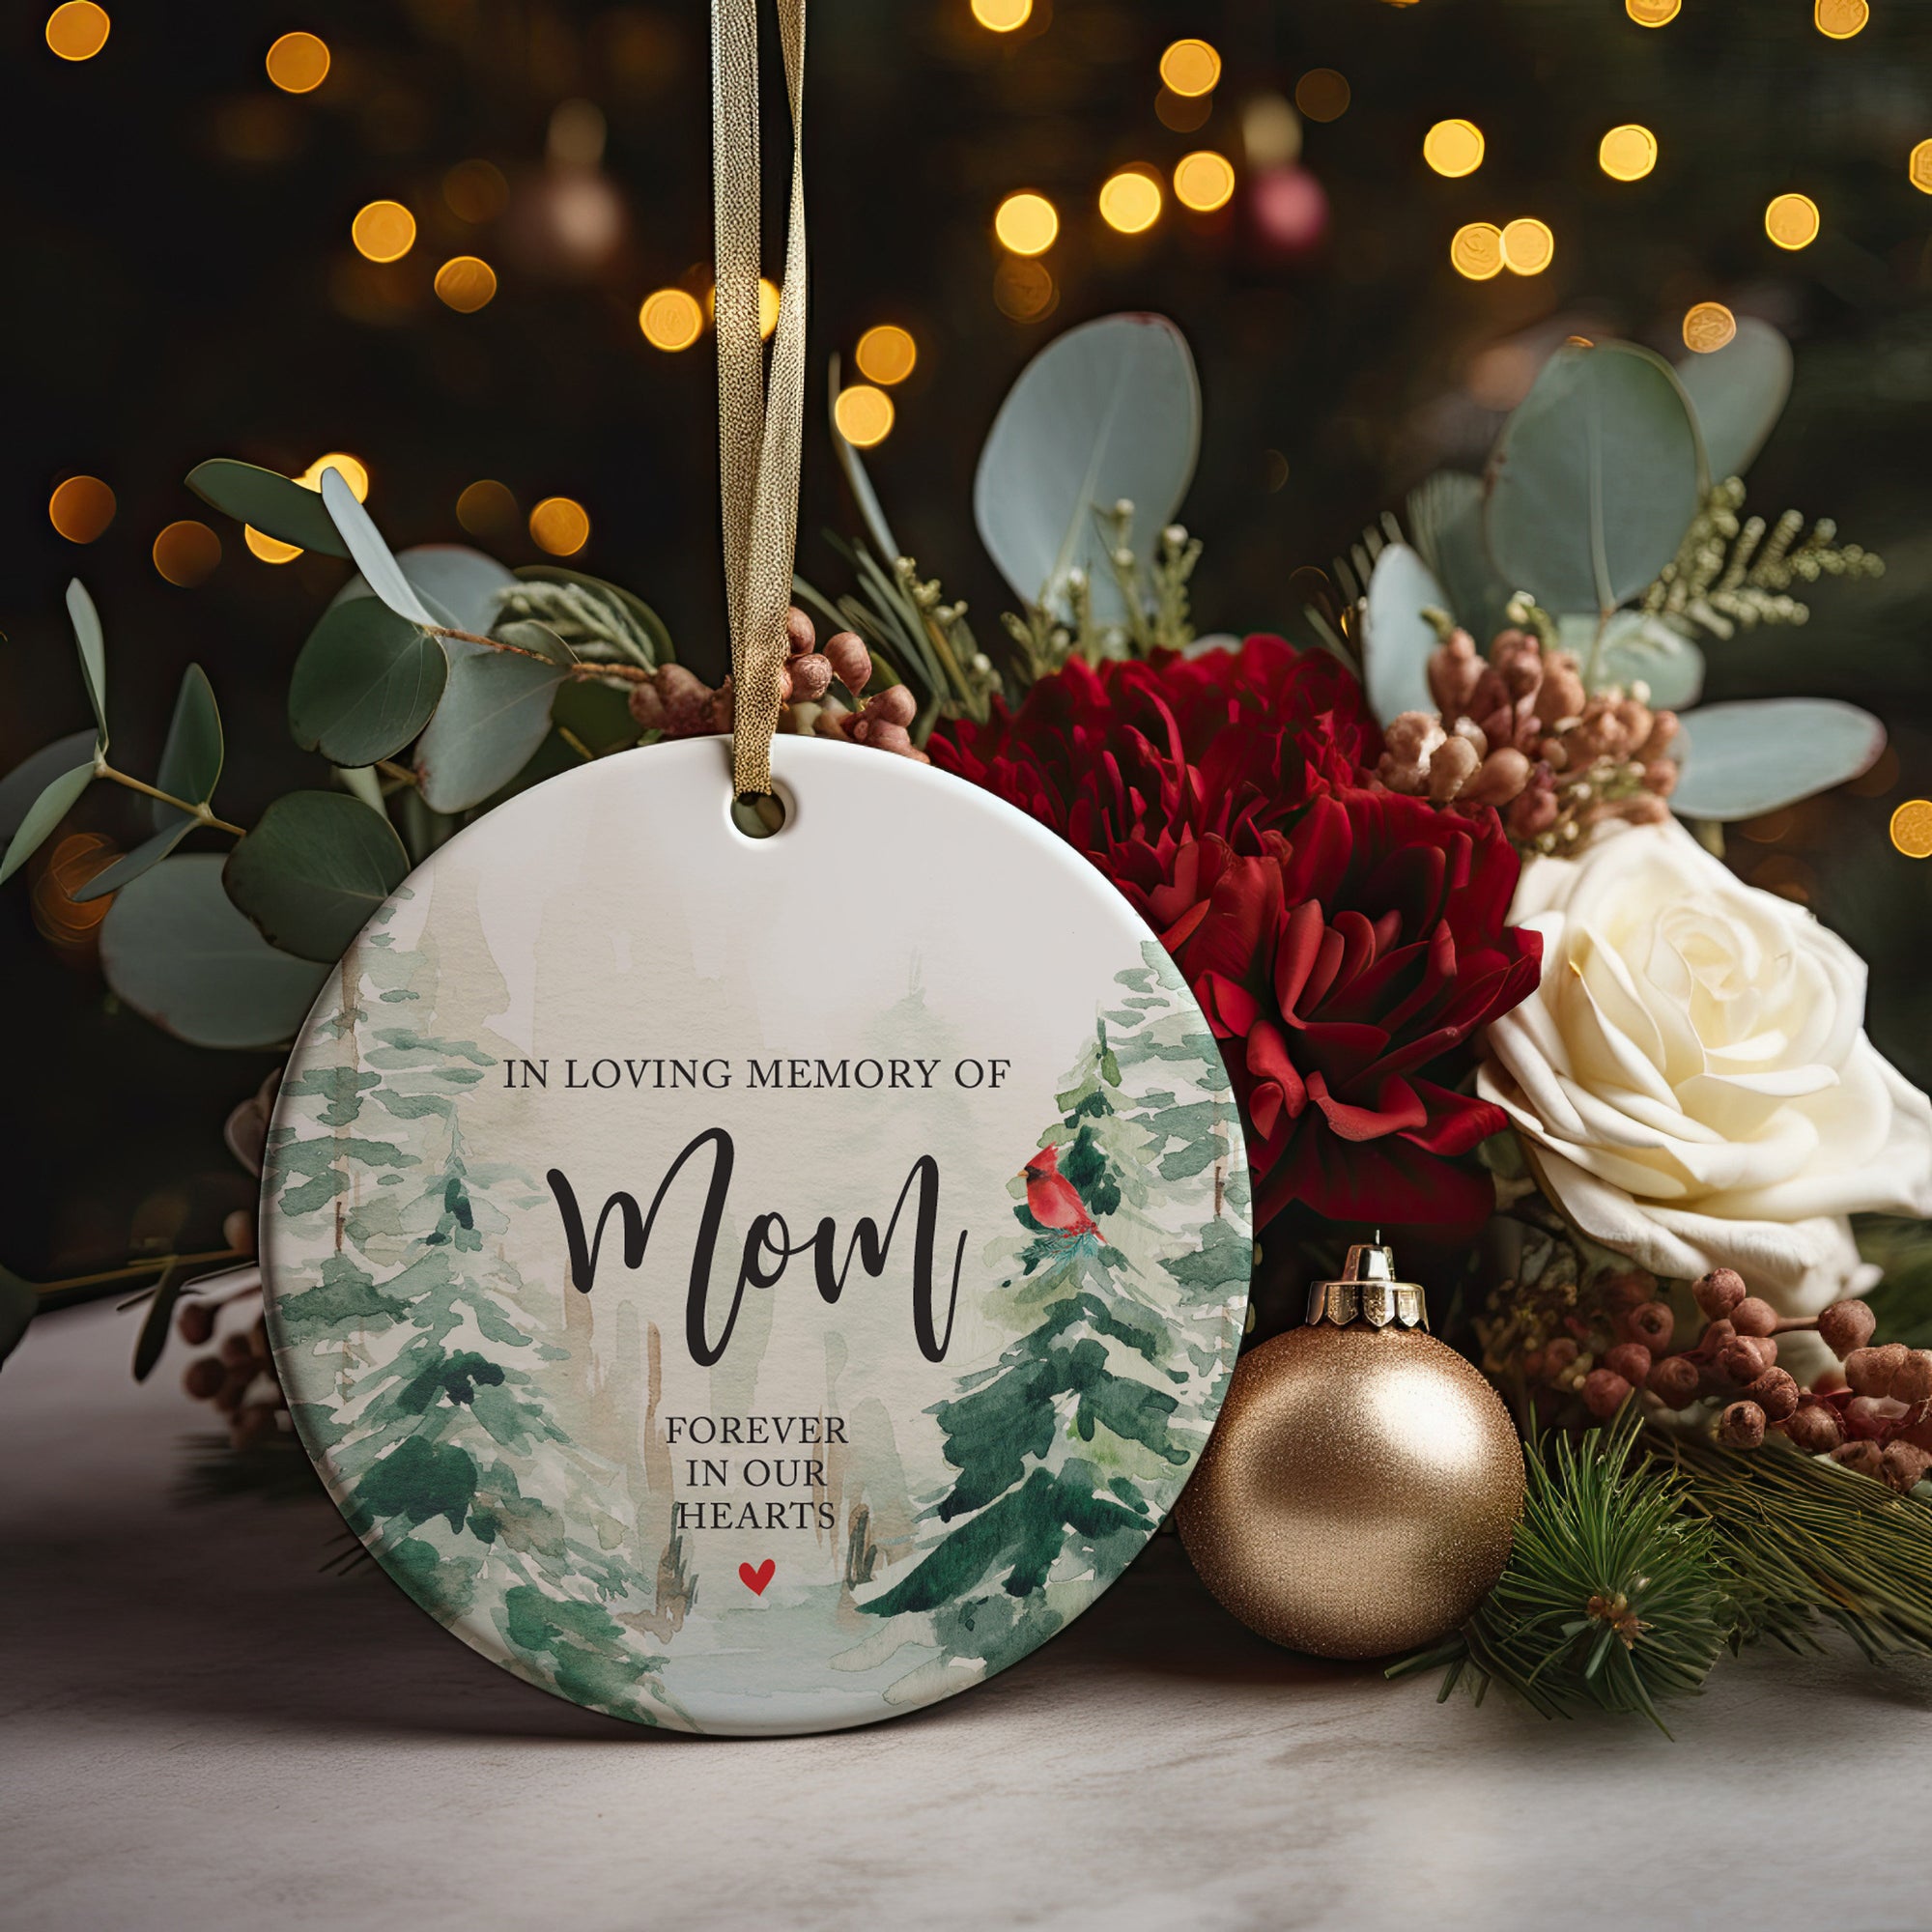 In Loving Memory Of Mom Forever In Our Hearts, Christmas Ornament + Free Gift Box and Ribbon, In Loving Memory of Mother Present Idea, Cardinal